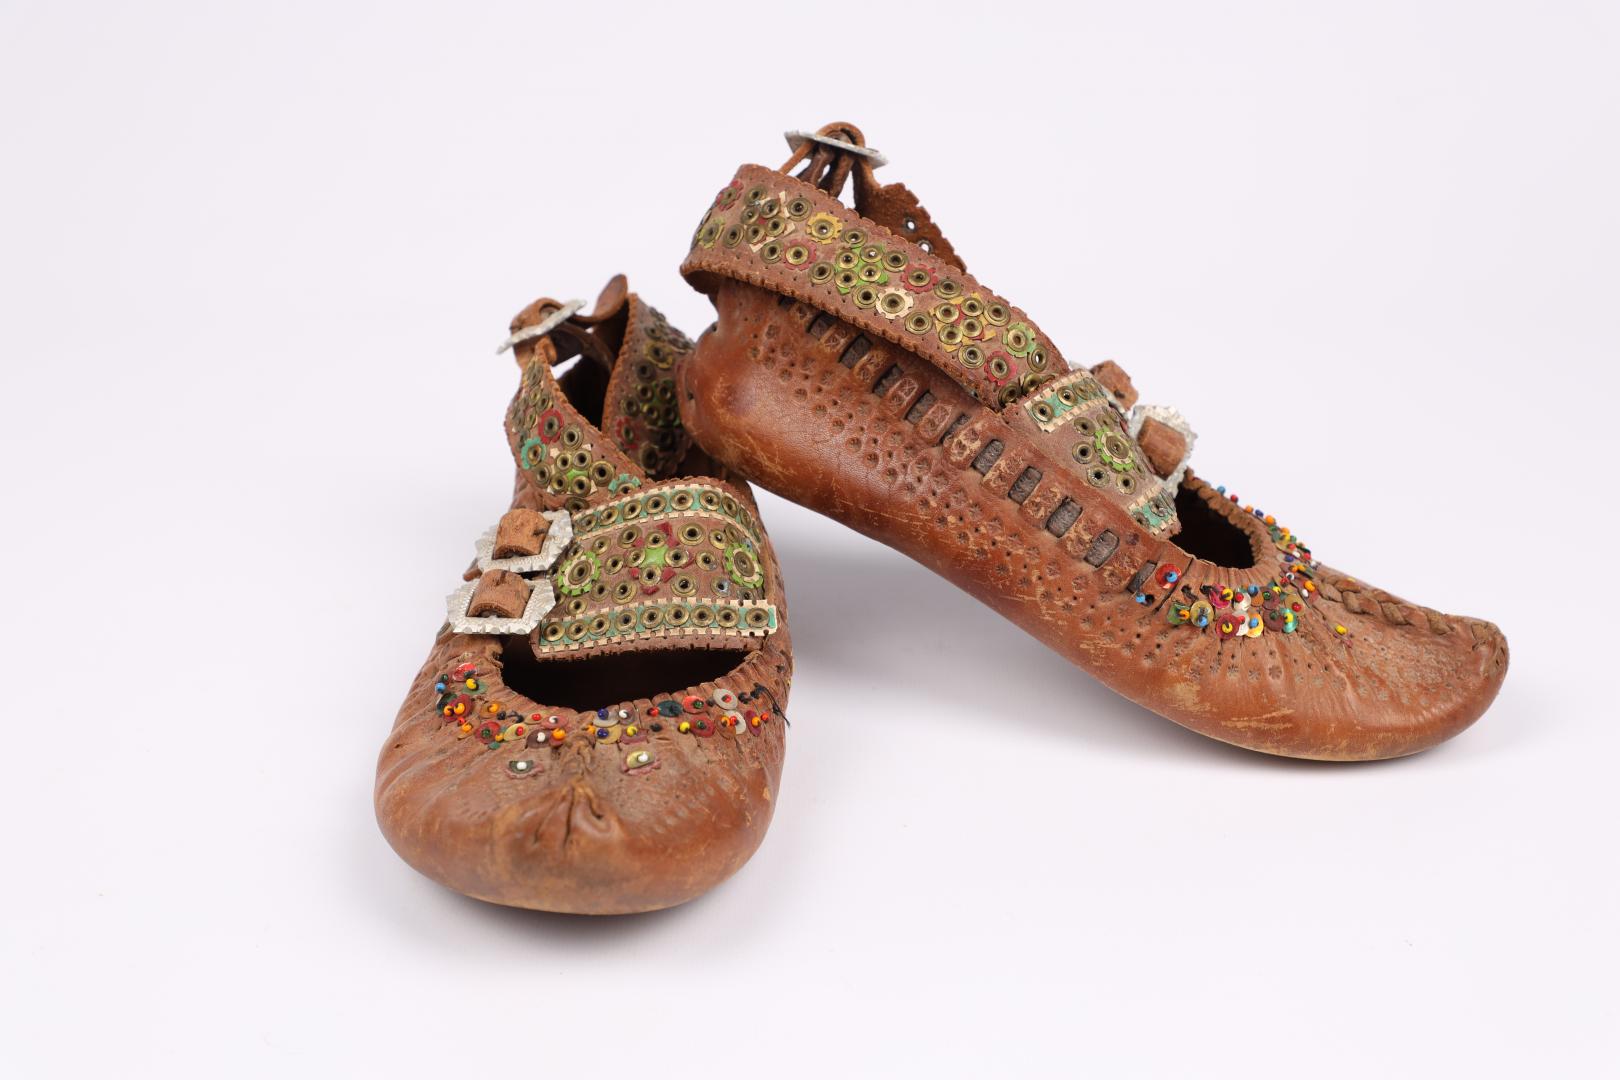 Postoly (women's boots) decorated with beads and sequins